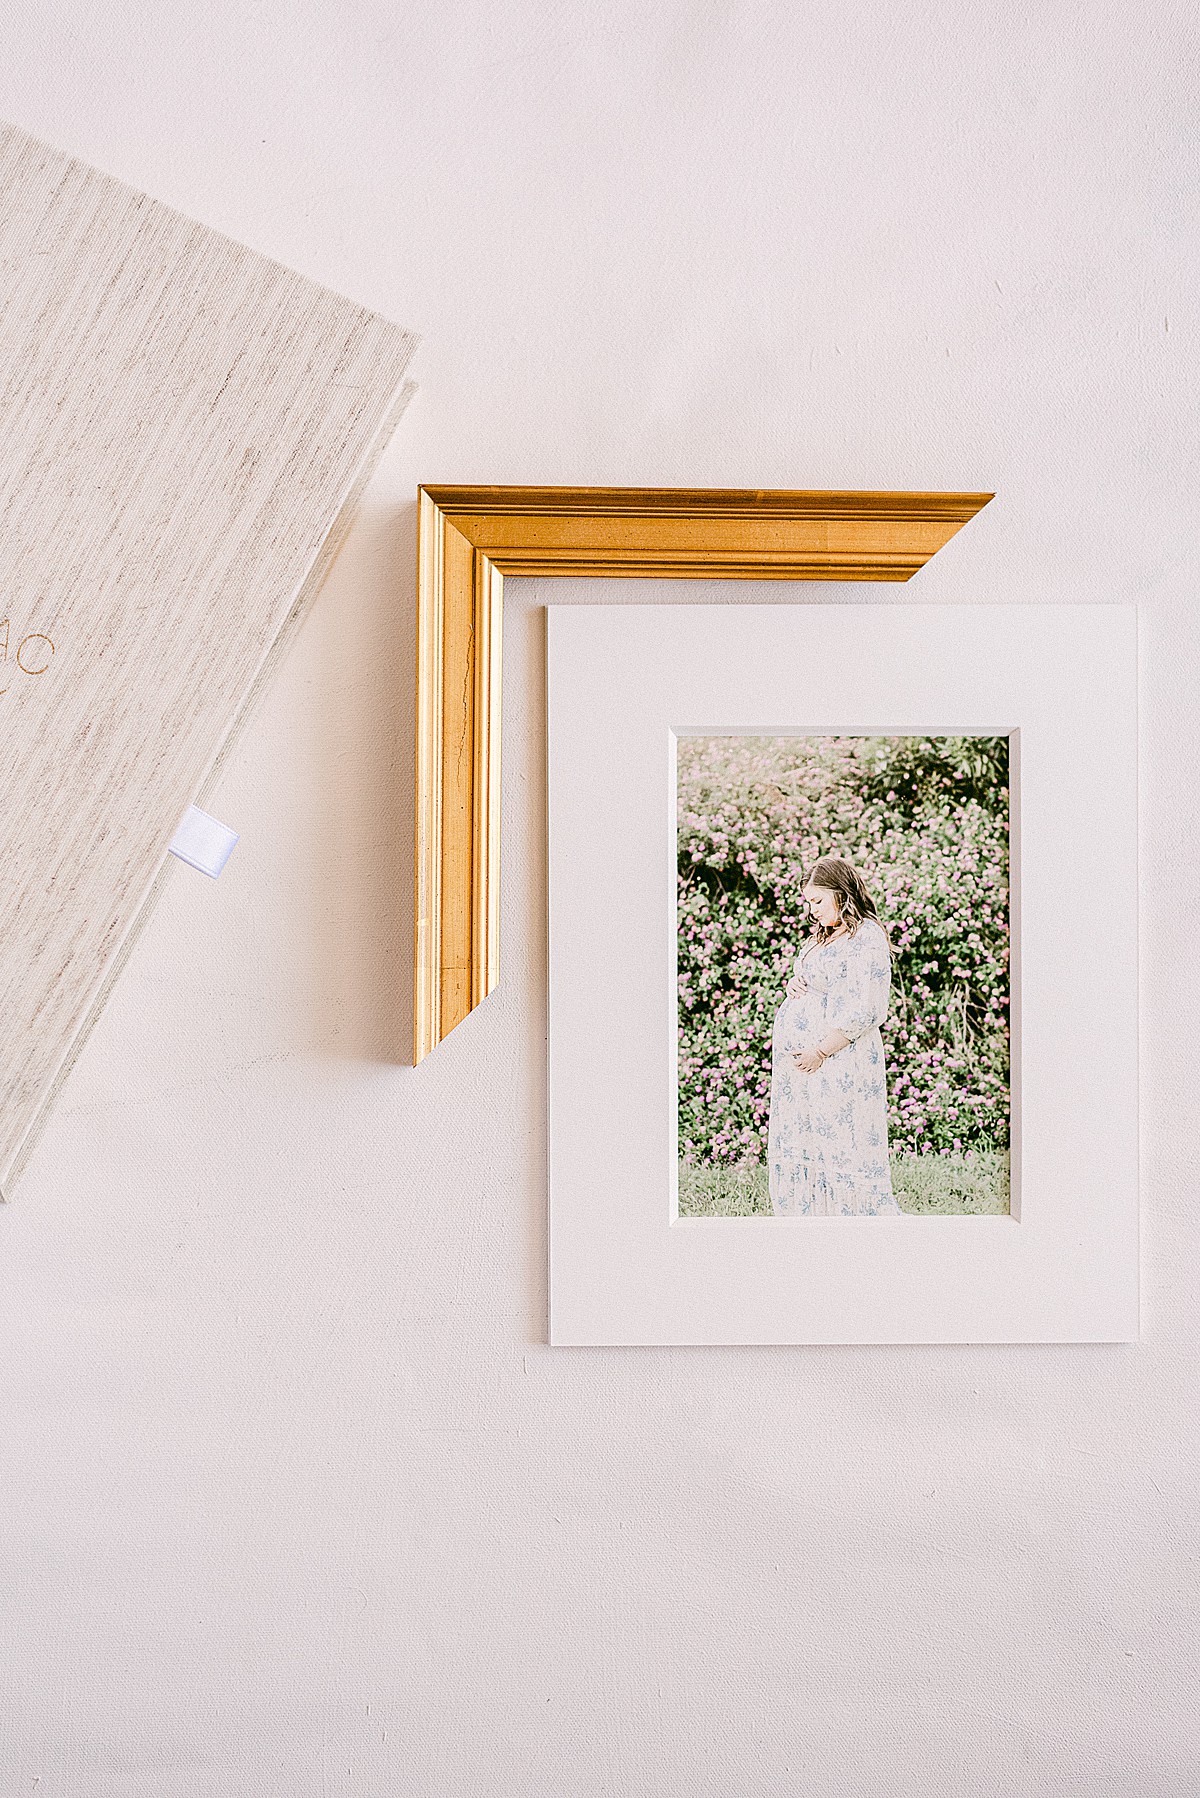 matted print of maternity photoshoot paired with frame moulding